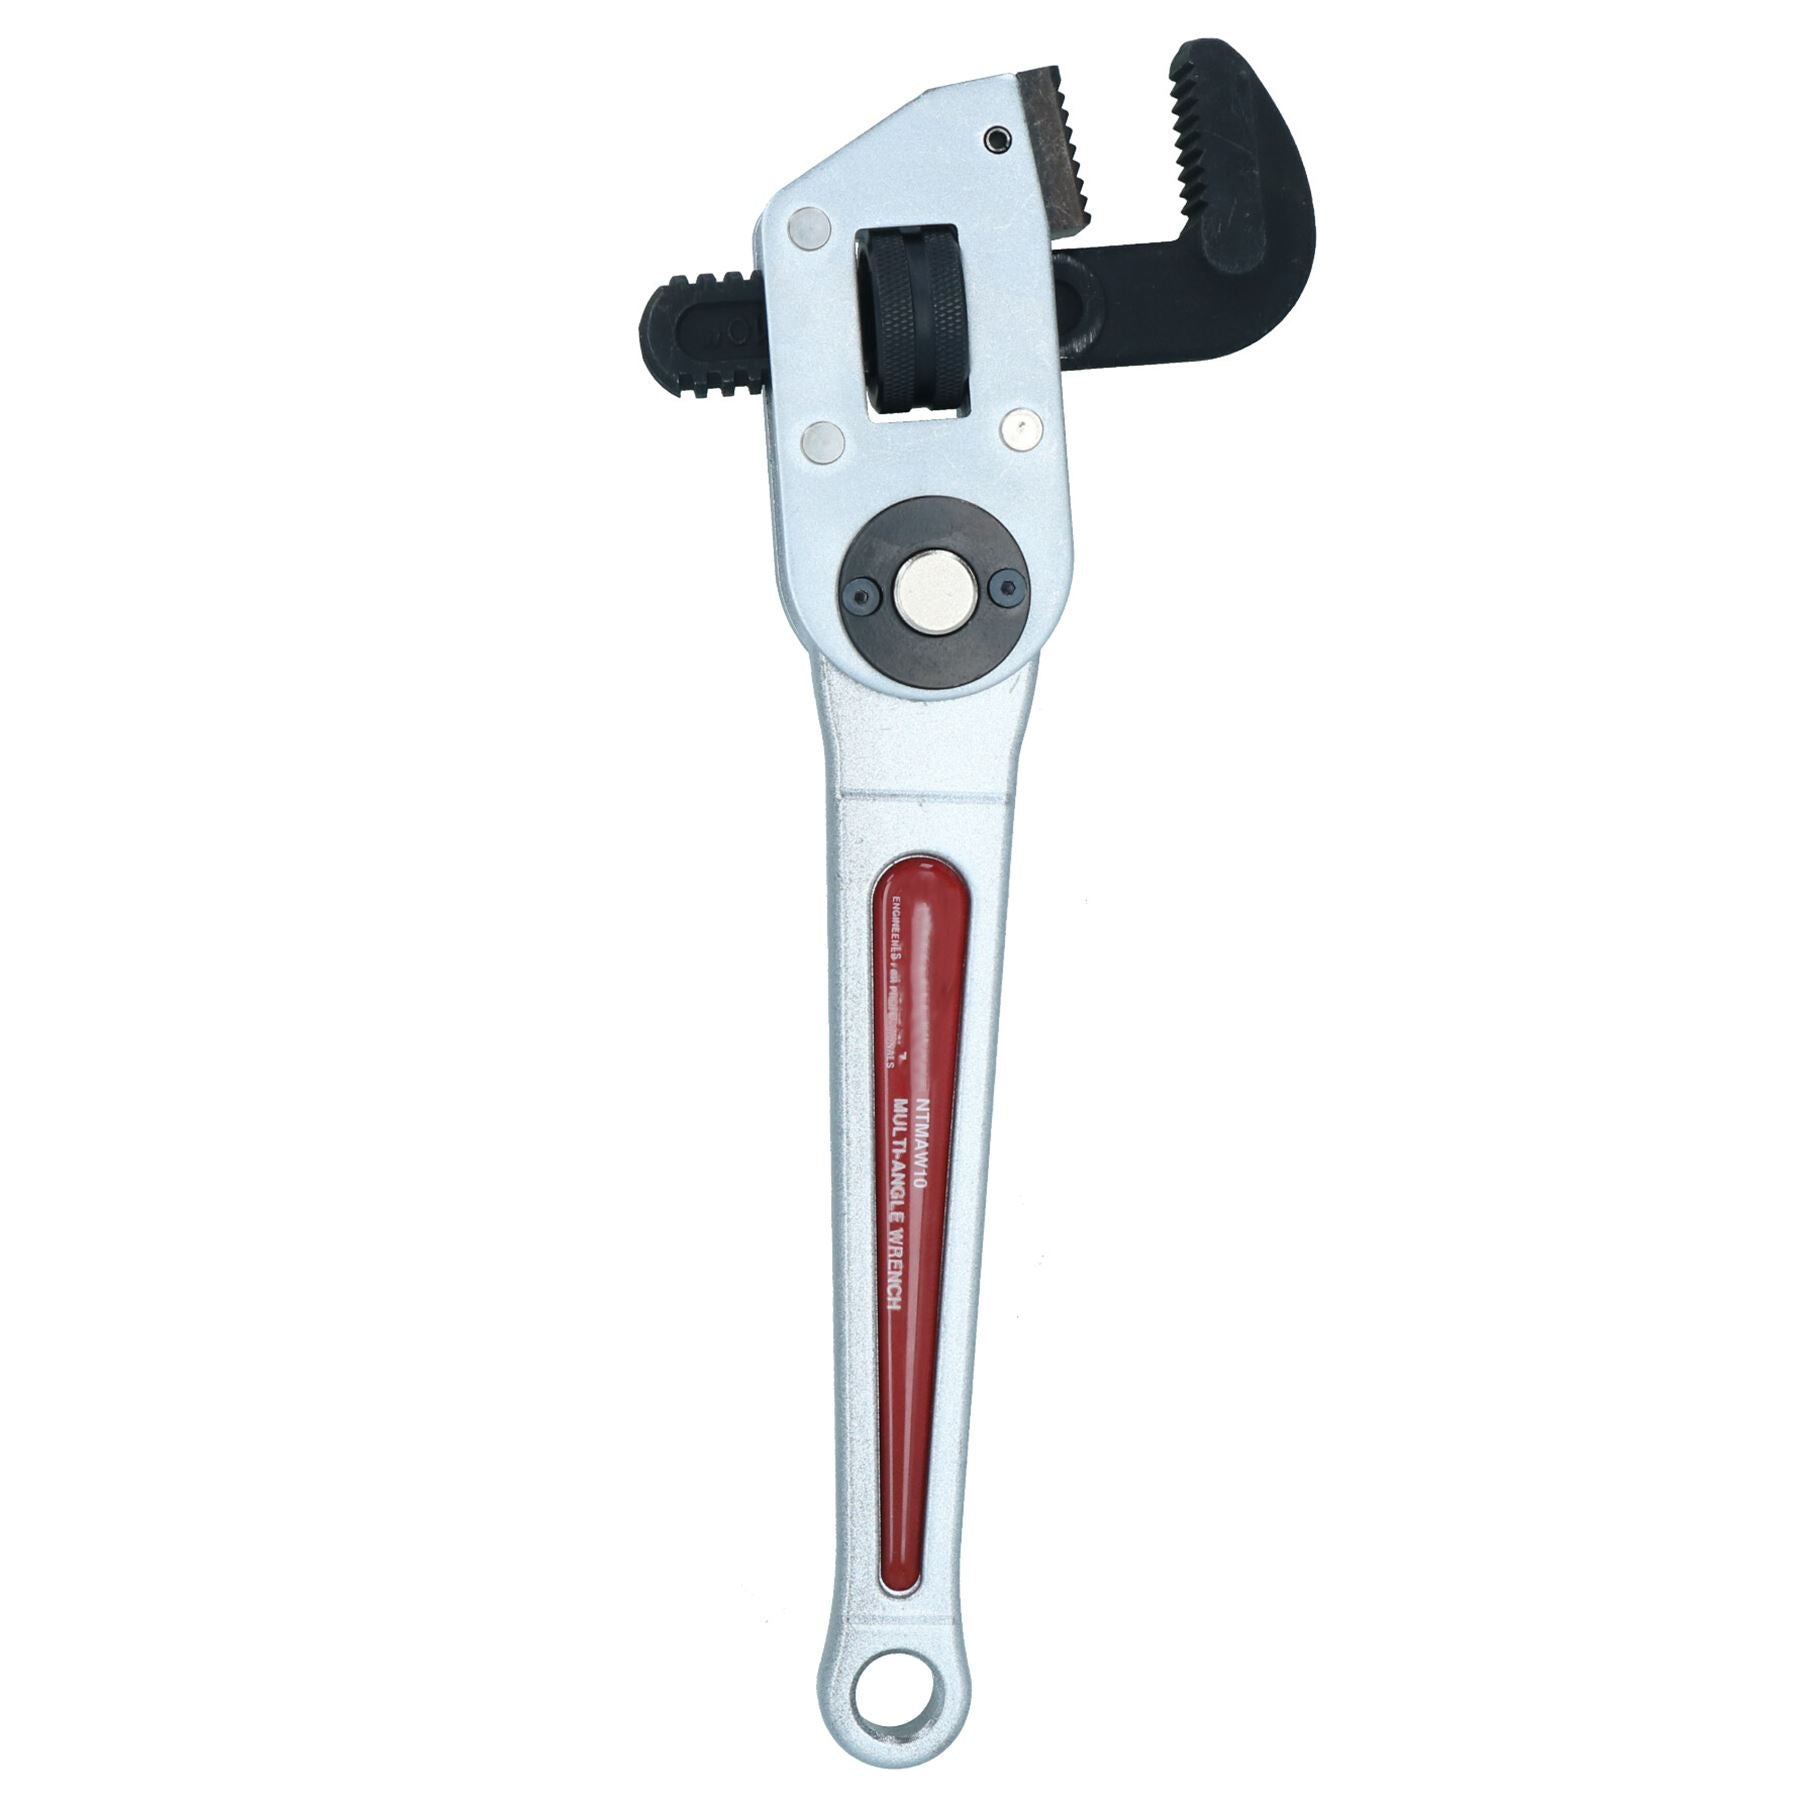 Multi Angle Adjustable Wrench Spanner Stilsons 0 – 53mm For Pipes 10 Positions